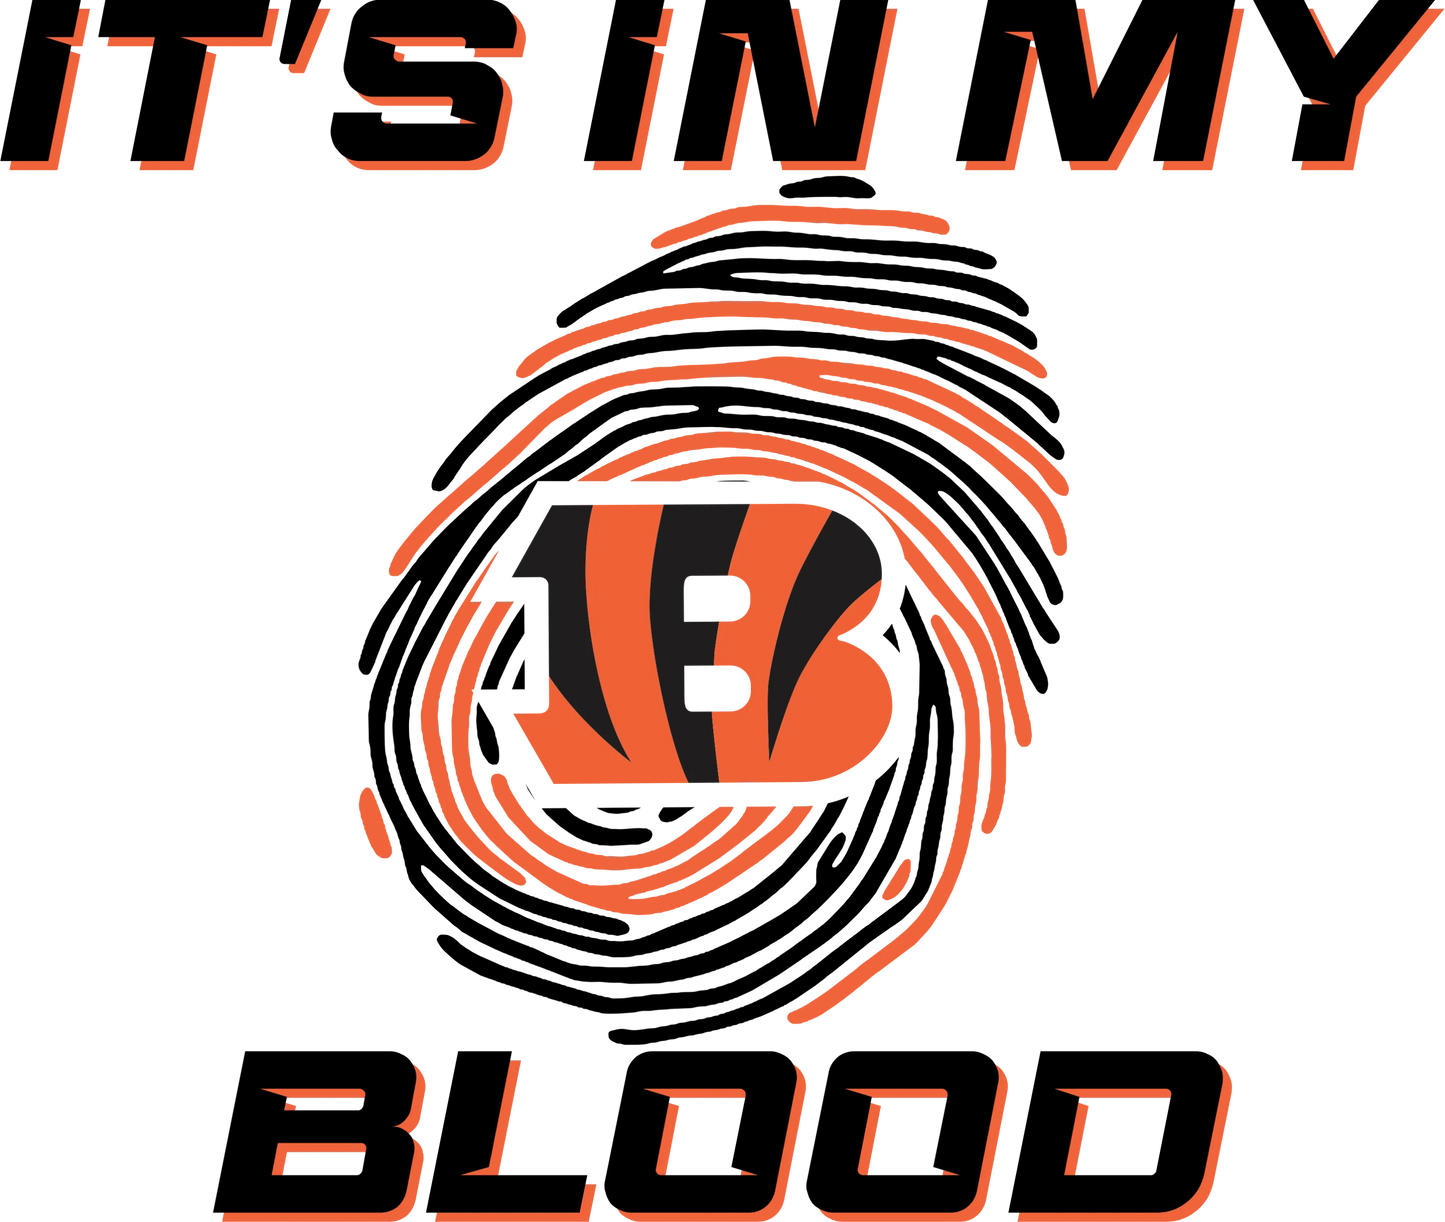 CB3 - "Bengals- It's In My Blood" DTF Transfer, DTF Transfer, Apparel & Accessories, Ace DTF